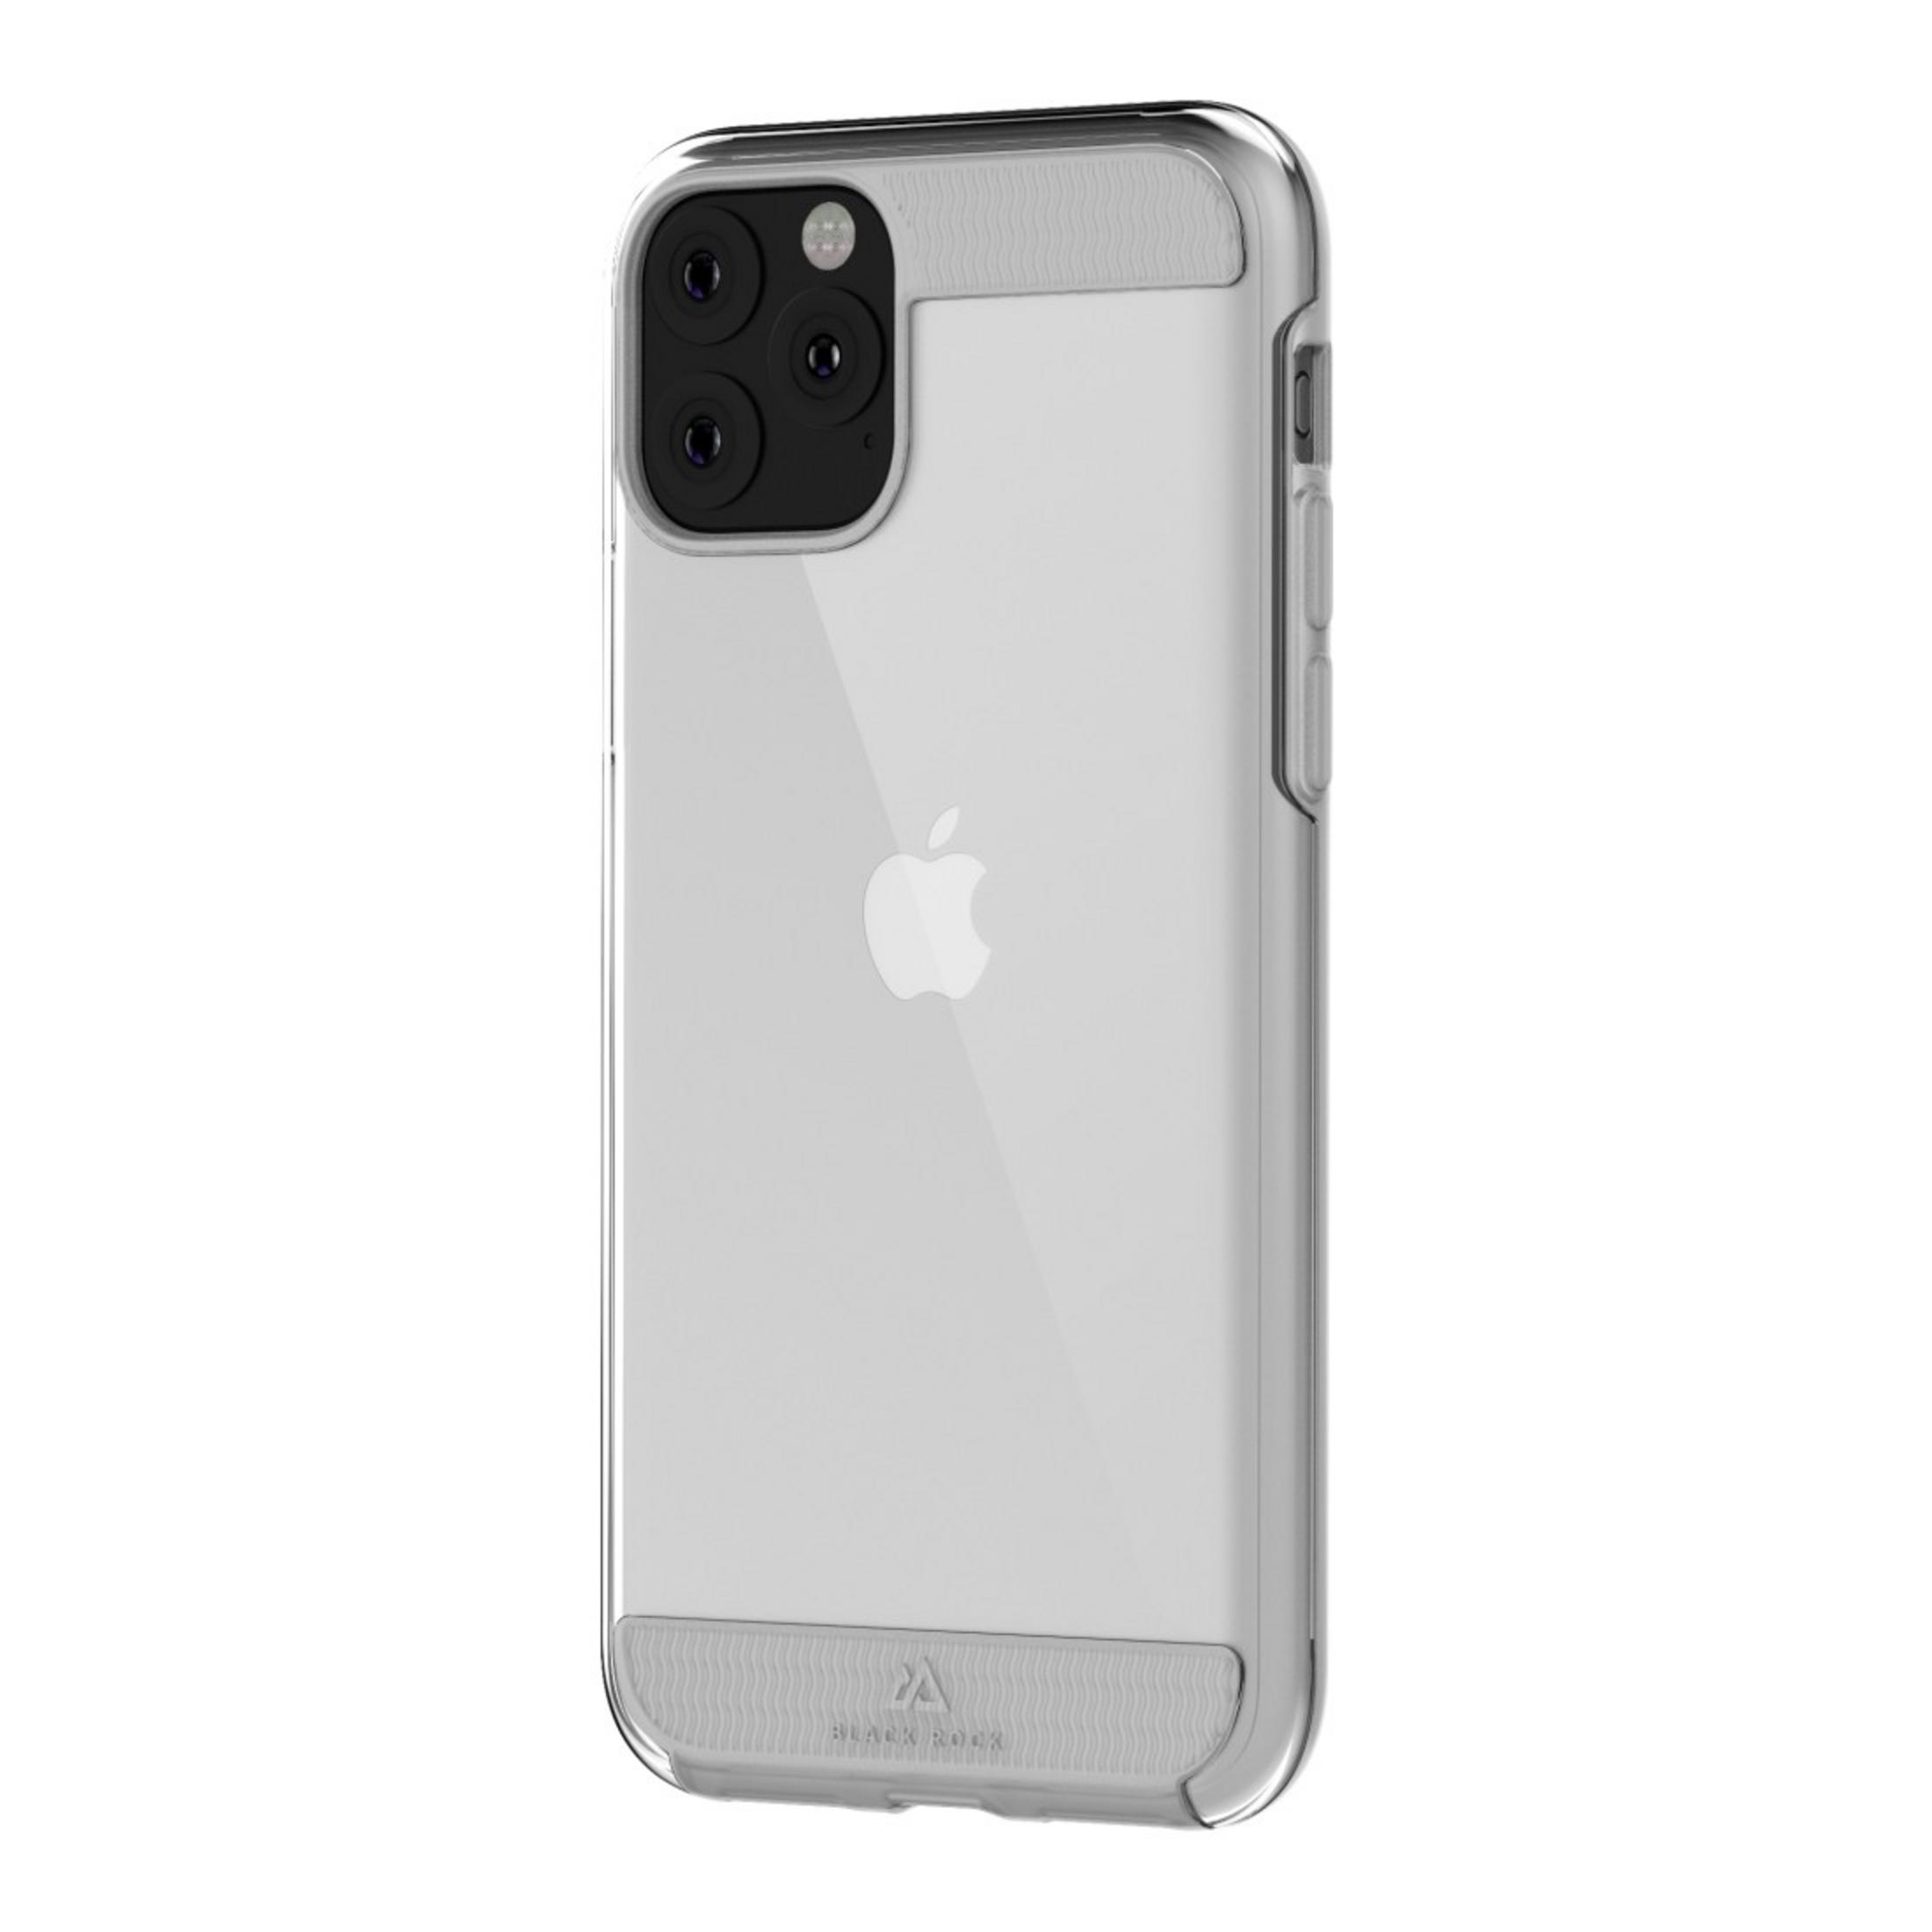 AIR TR, ROCK Backcover, 11 PRO 11 CO iPhone ROBUST Transparent IPH Pro, 186971 BLACK Apple,